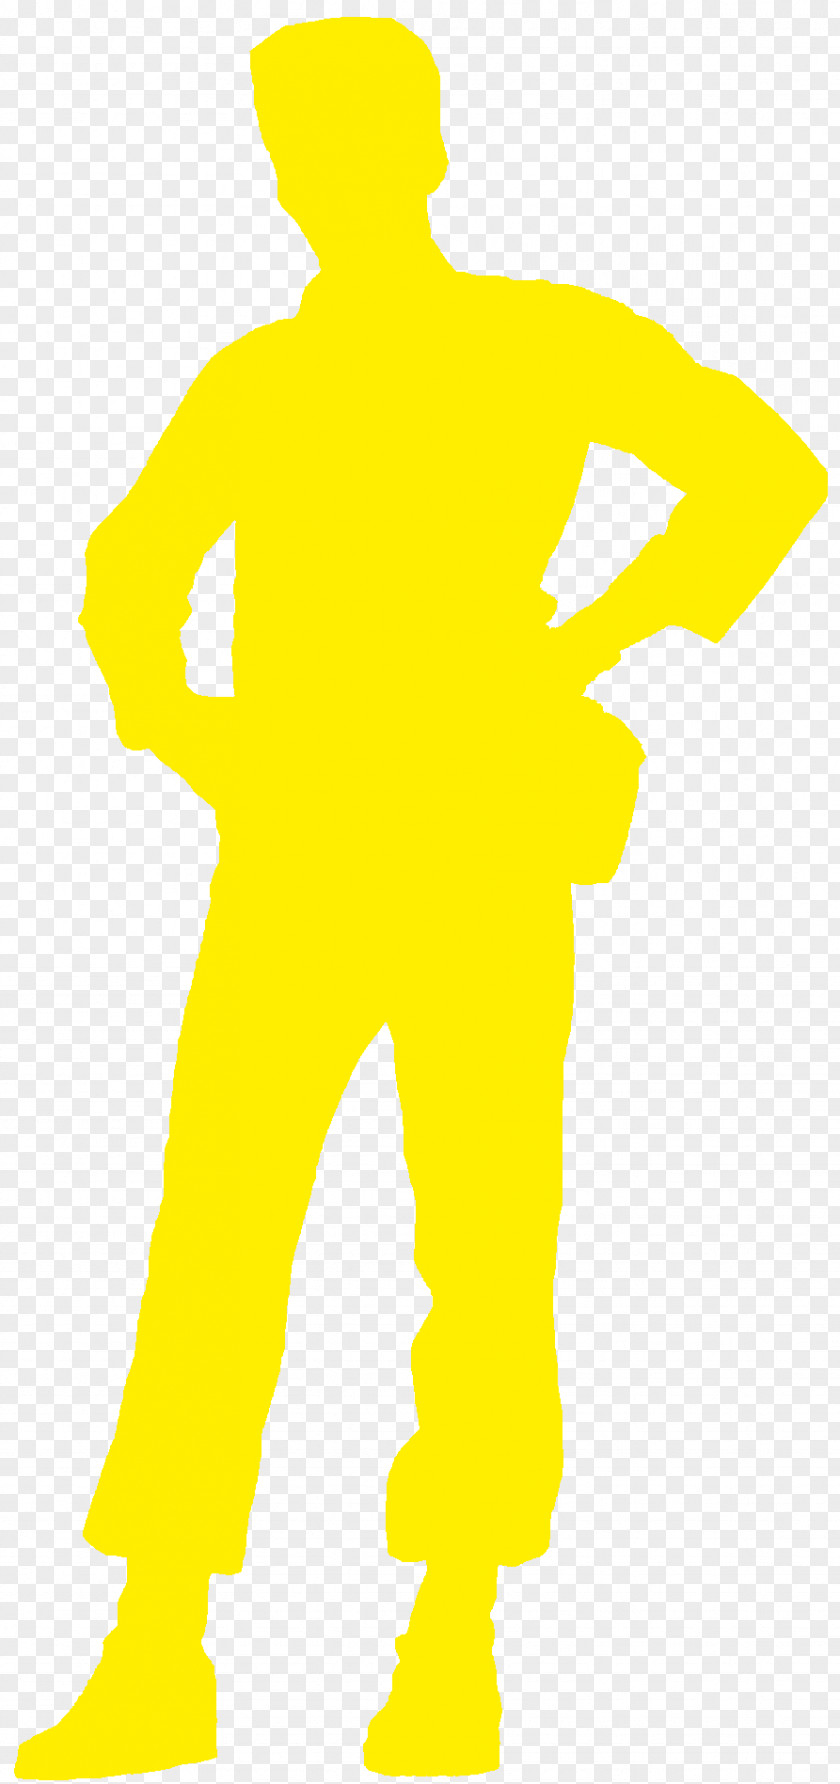 Elvis Presley G.I. Blues Yellow Wall Decal Clip Art PNG